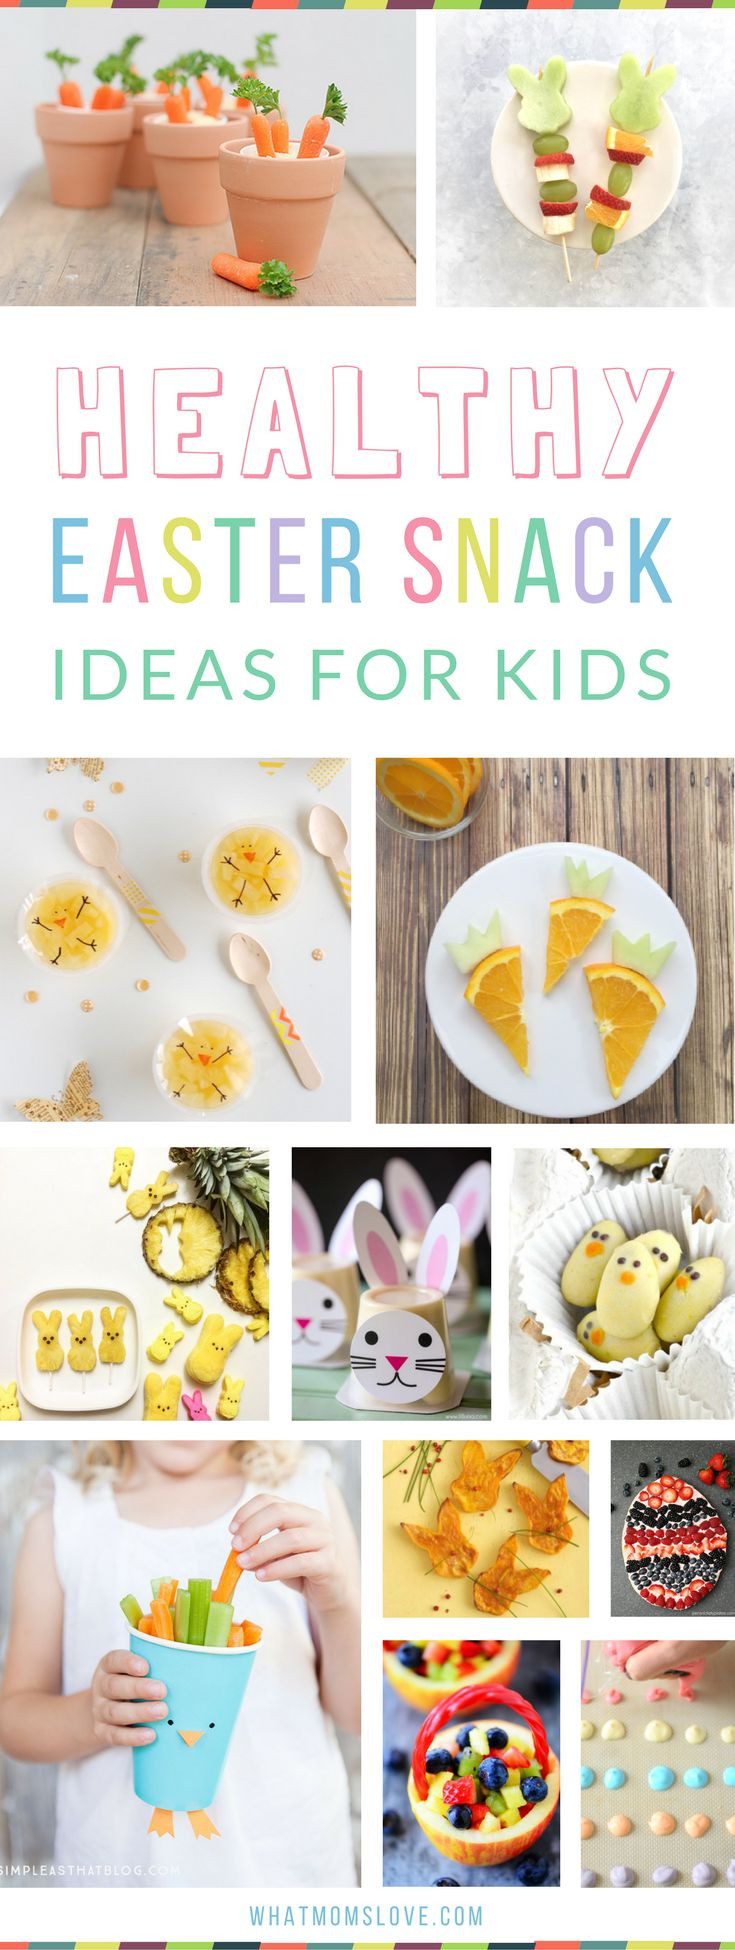 Kindergarten Easter Party Food Ideas
 707 best images about Easter on Pinterest